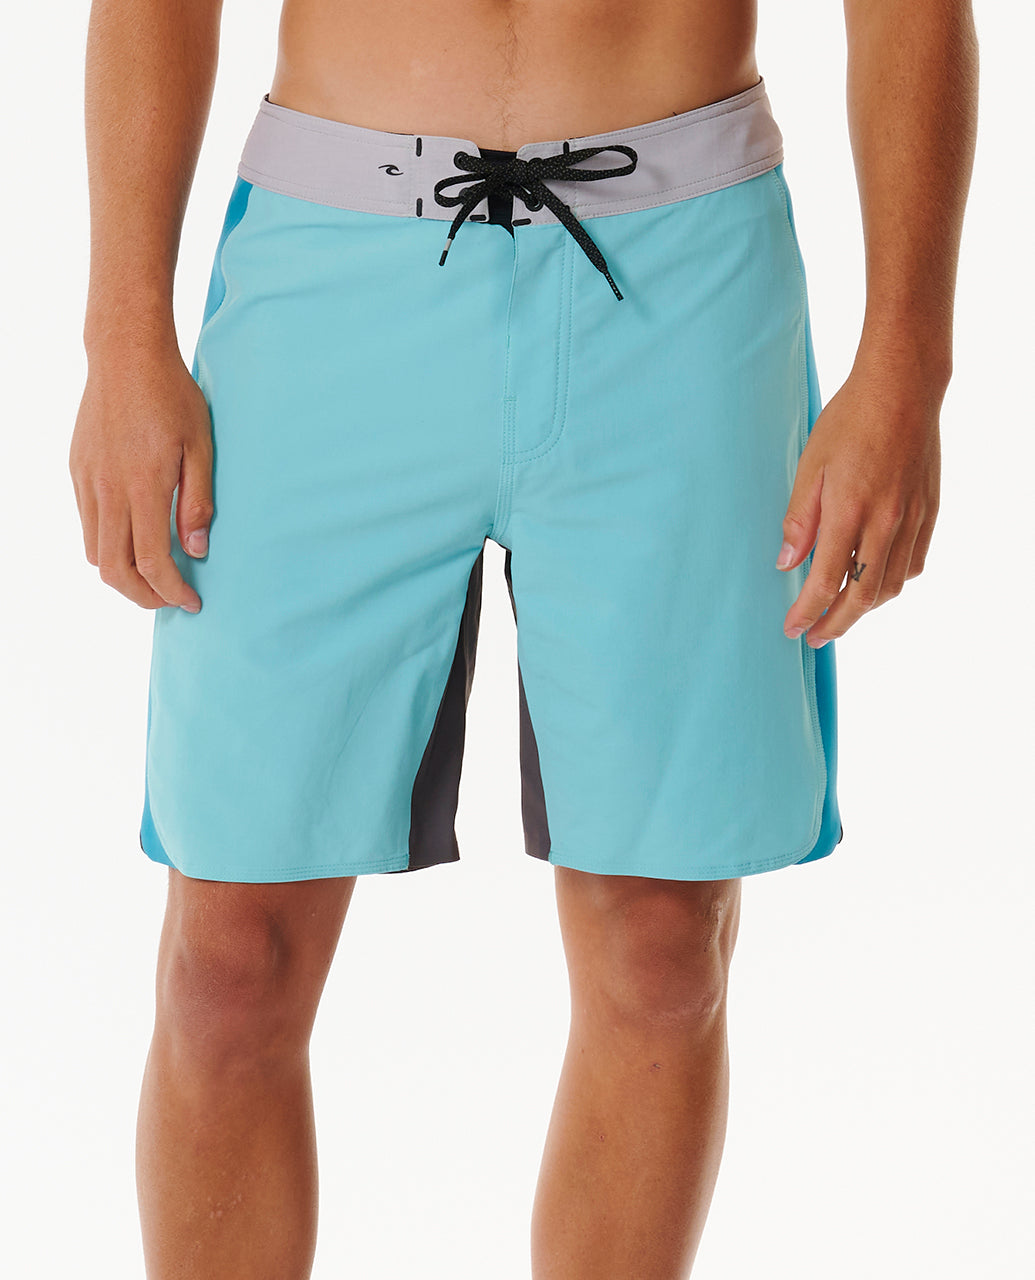 Mirage 3-2-One Ultimate 19" Boardshorts - Light Teal